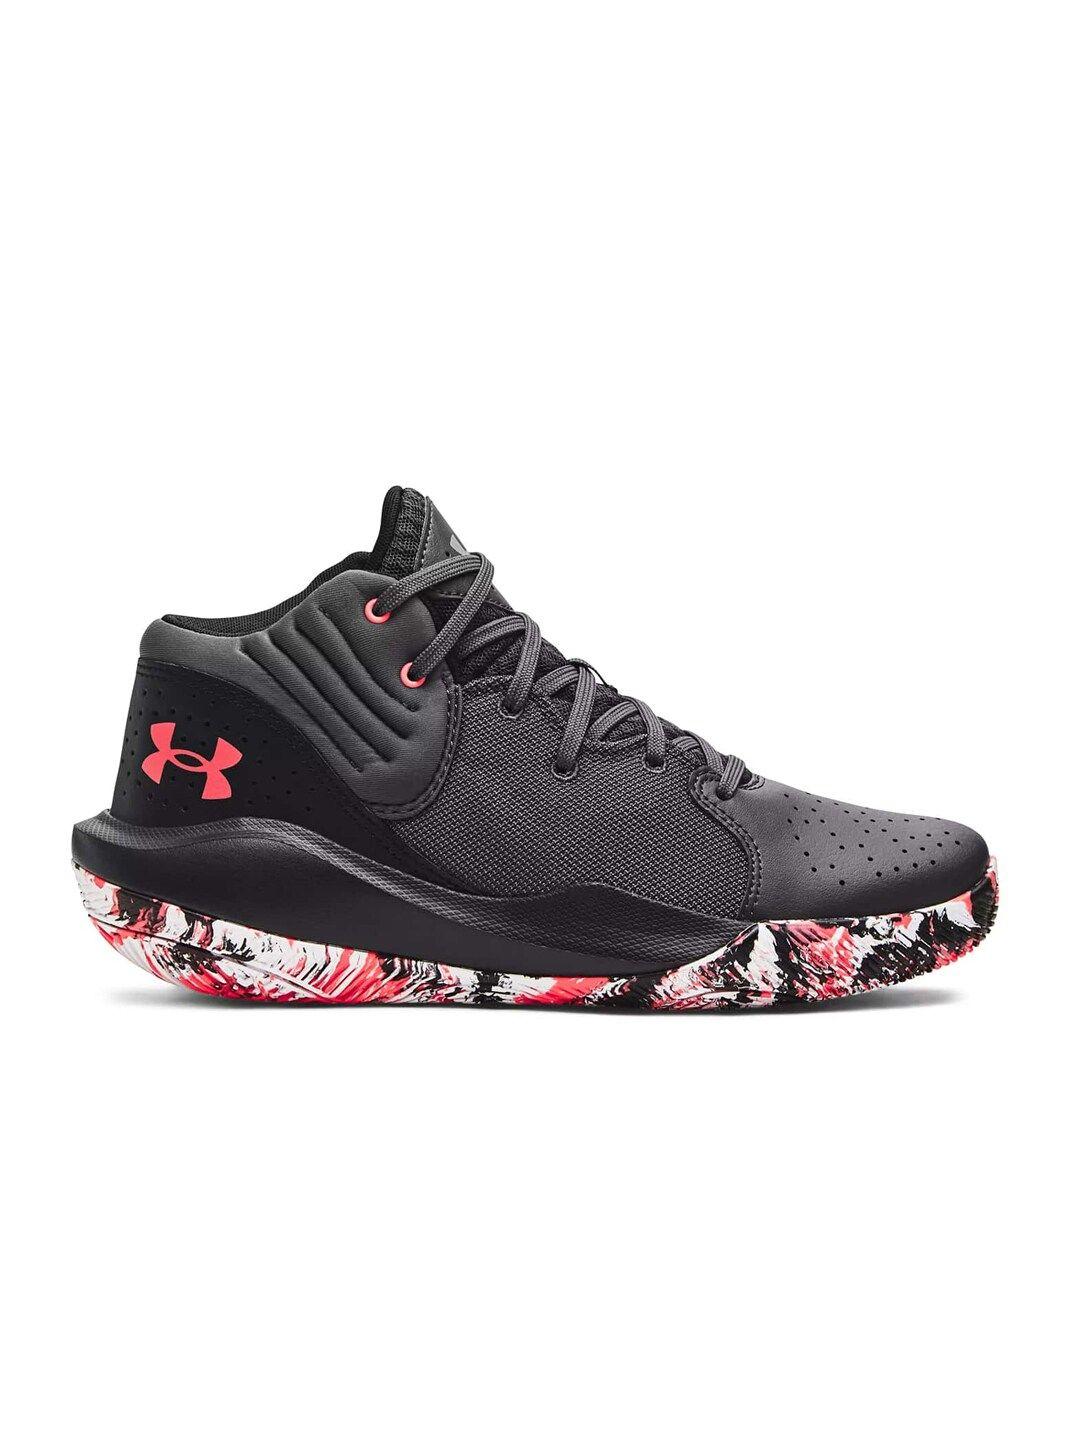 under armour unisex perforated detail woven design jet '21 basketball shoes